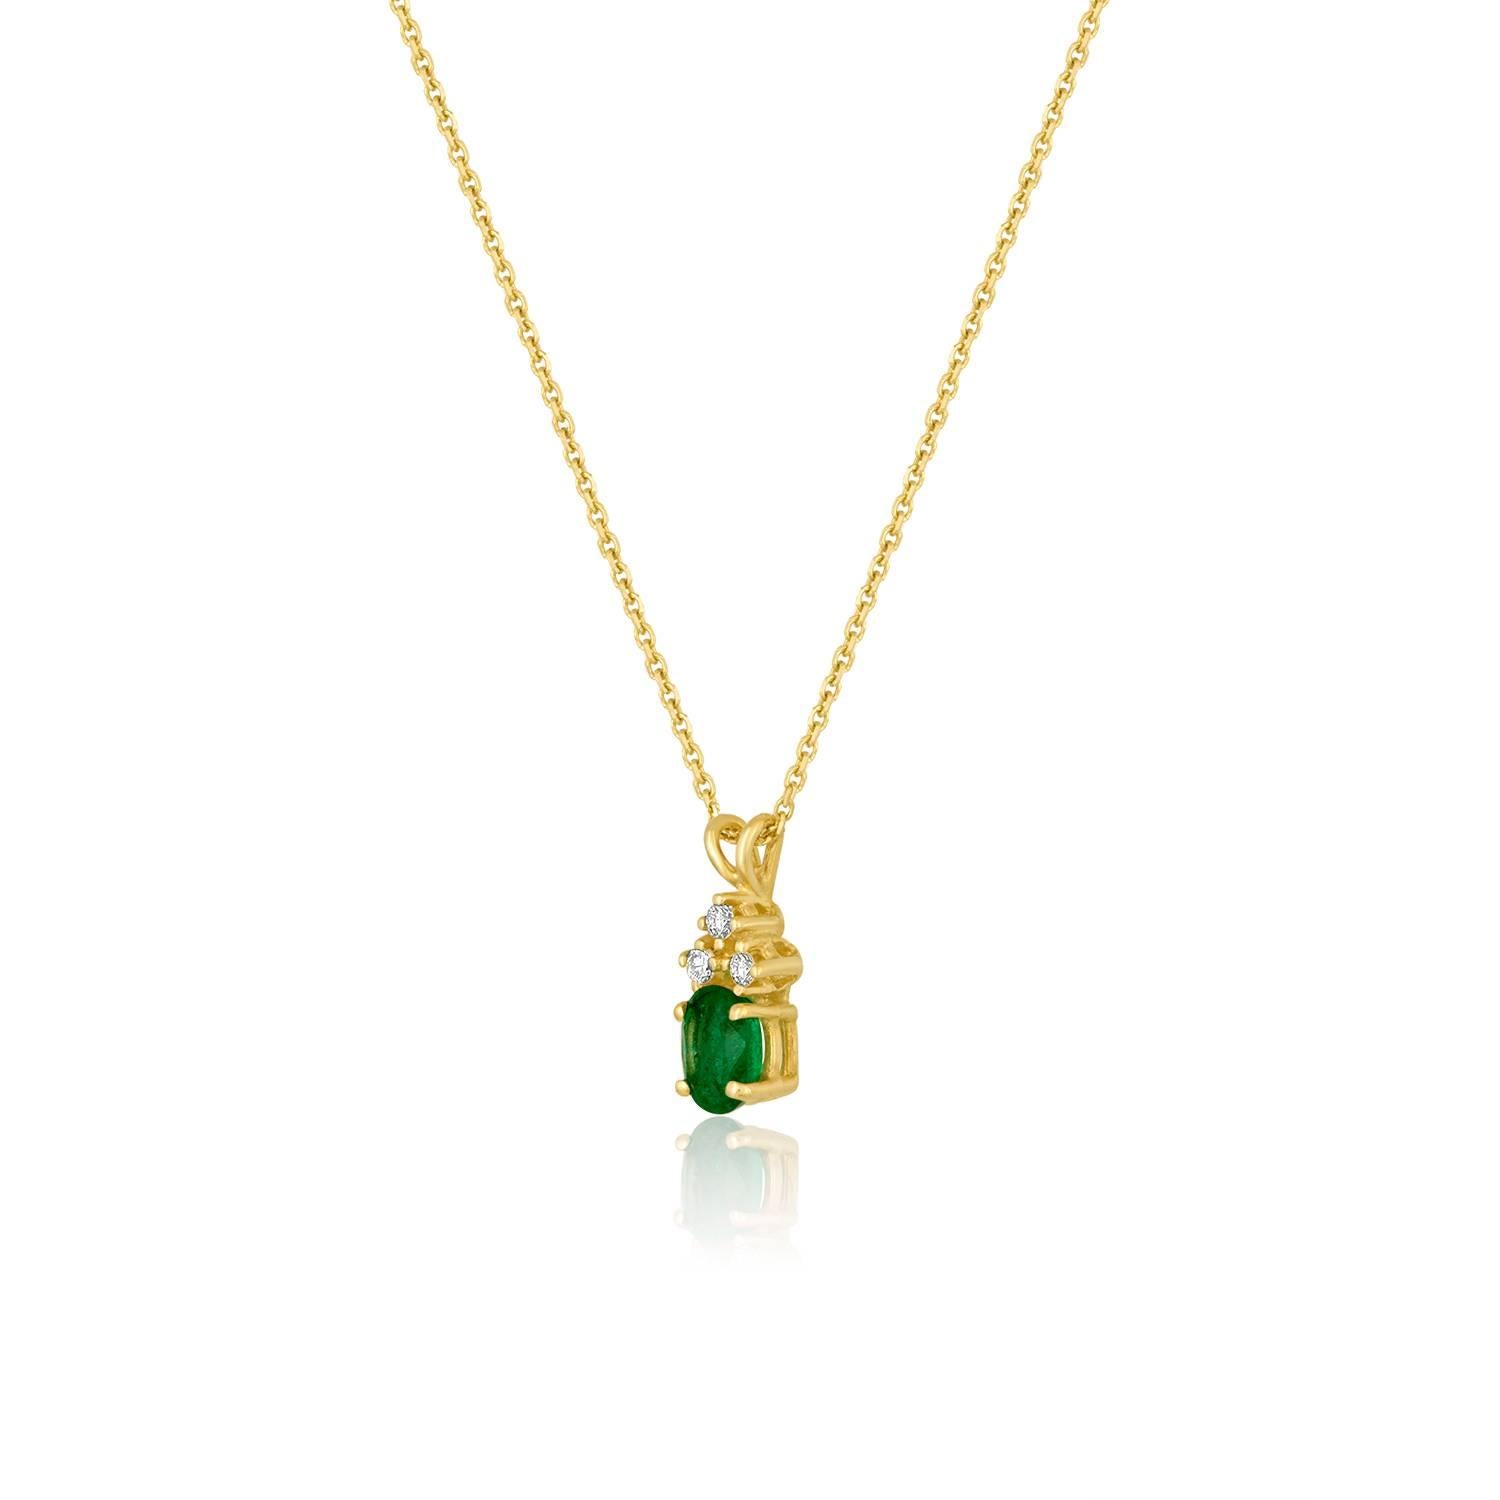 Emerald & Diamond Pendant On The Chain Necklace.
The necklace is 14K Yellow Gold.
There are 0.12 Carats in Diamonds G SI
Natural 1.00 Carat Oval Emerald Eye Visible Inclusions.
The pendant measure 10/16